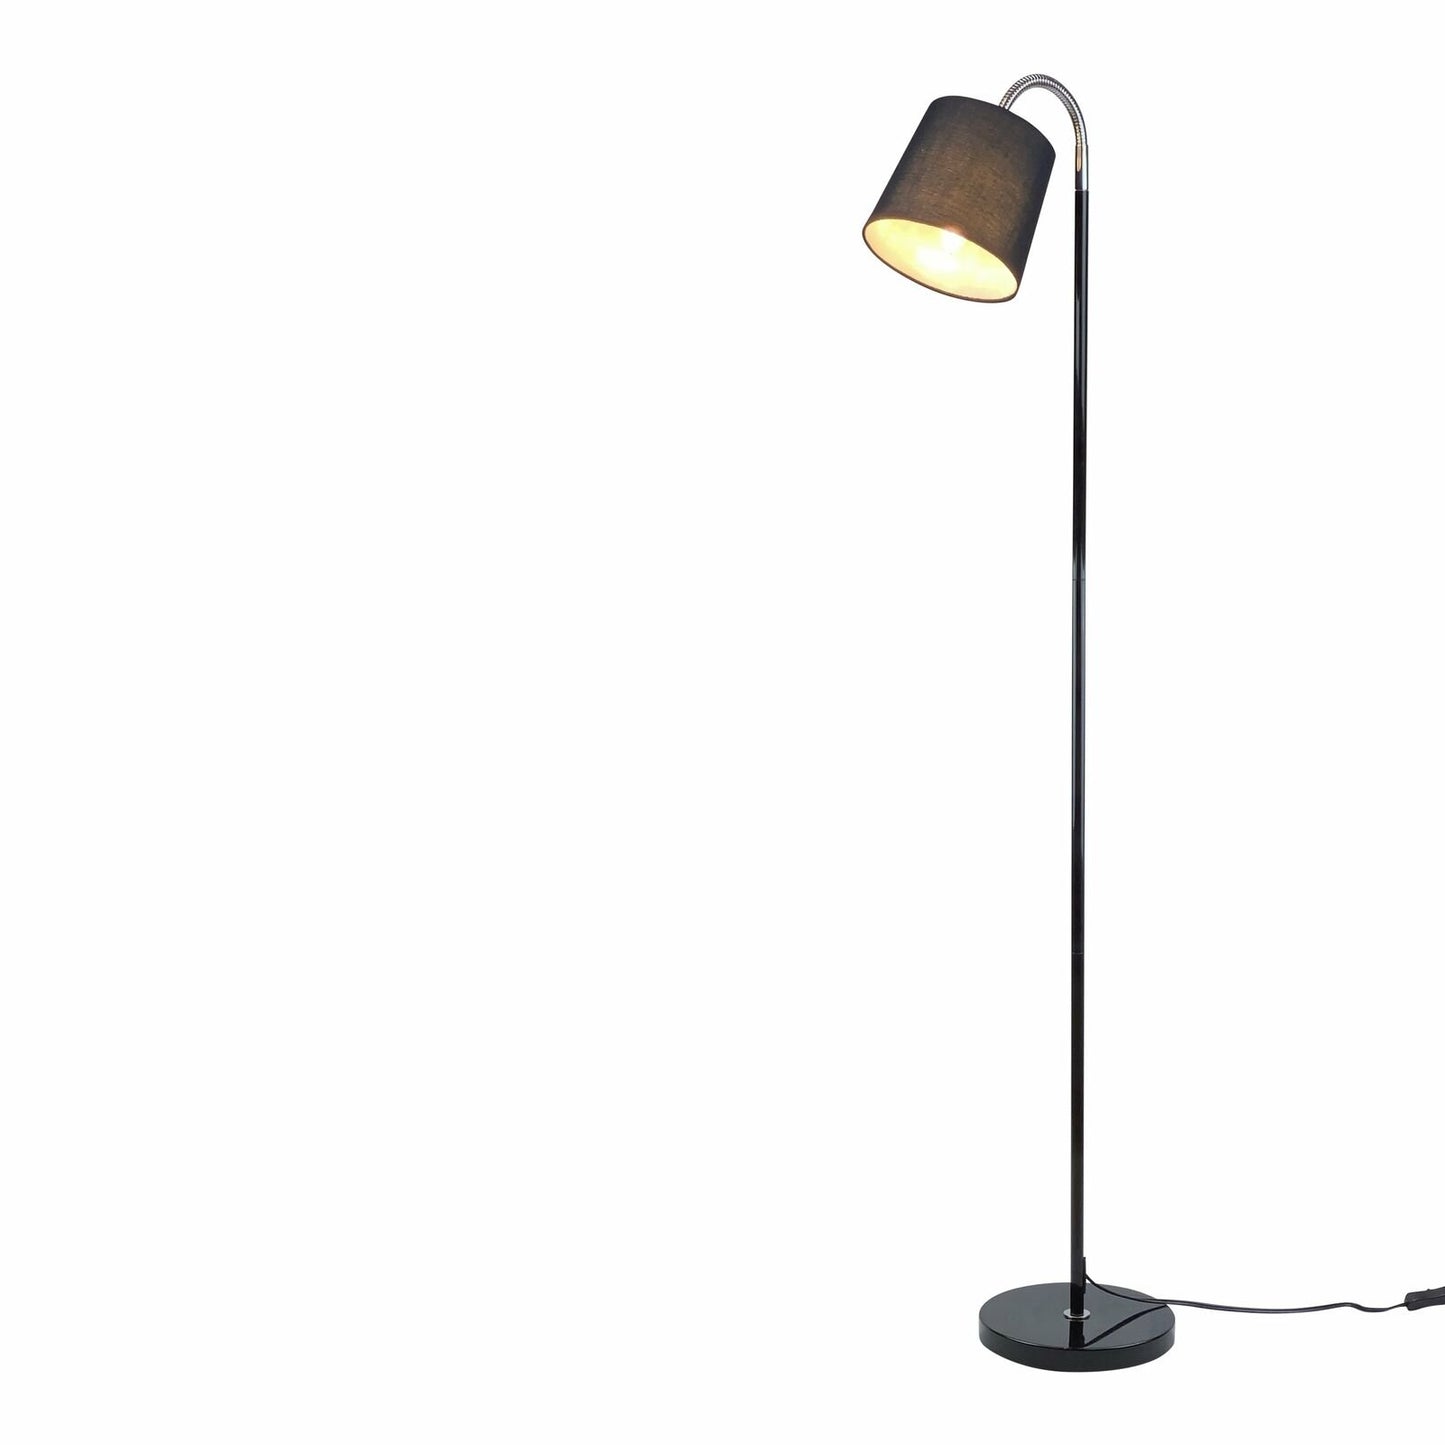 Floor Lamp With Chrome Adjustable Gooseneck Head Lamp And Fabric Drum Lamp Shade